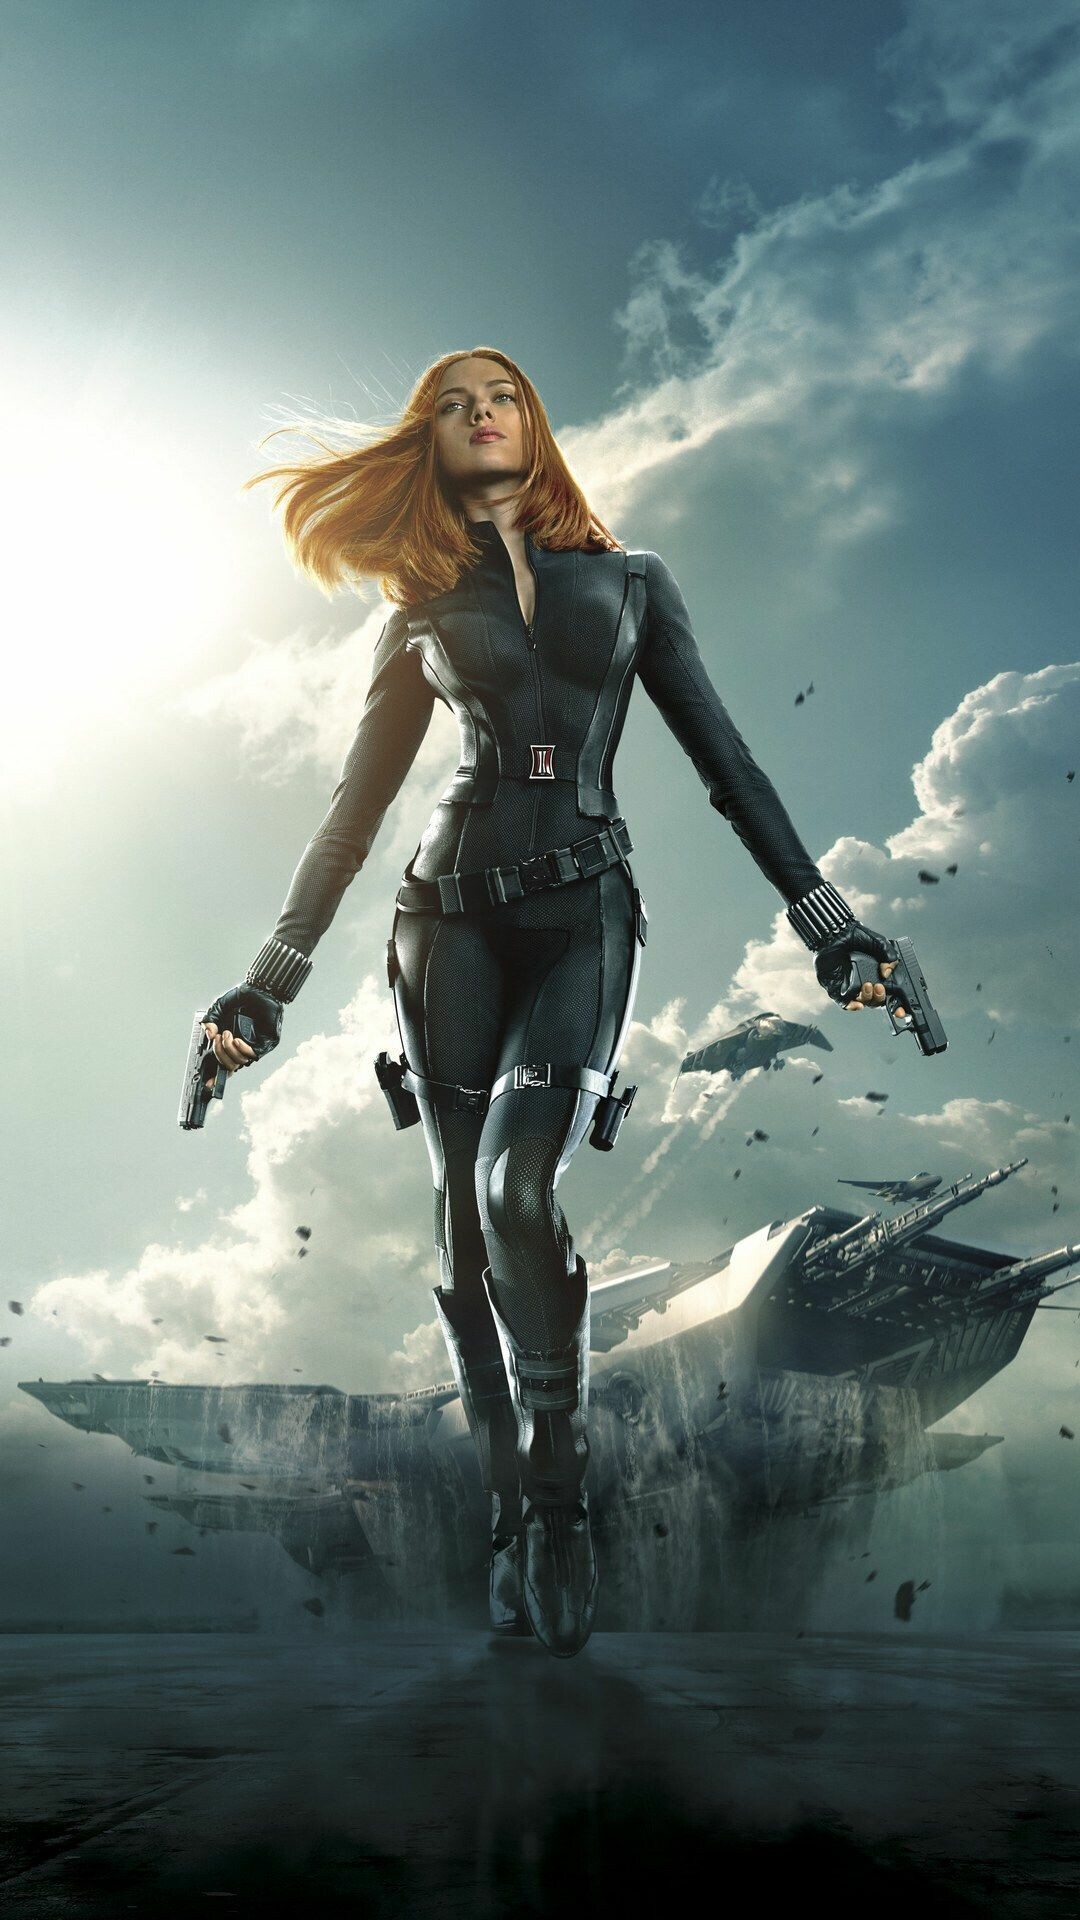 Marvel Girls: Scarlett Johansson, Black Widow, trained in the Red Room from childhood to be a KGB assassin. 1080x1920 Full HD Background.